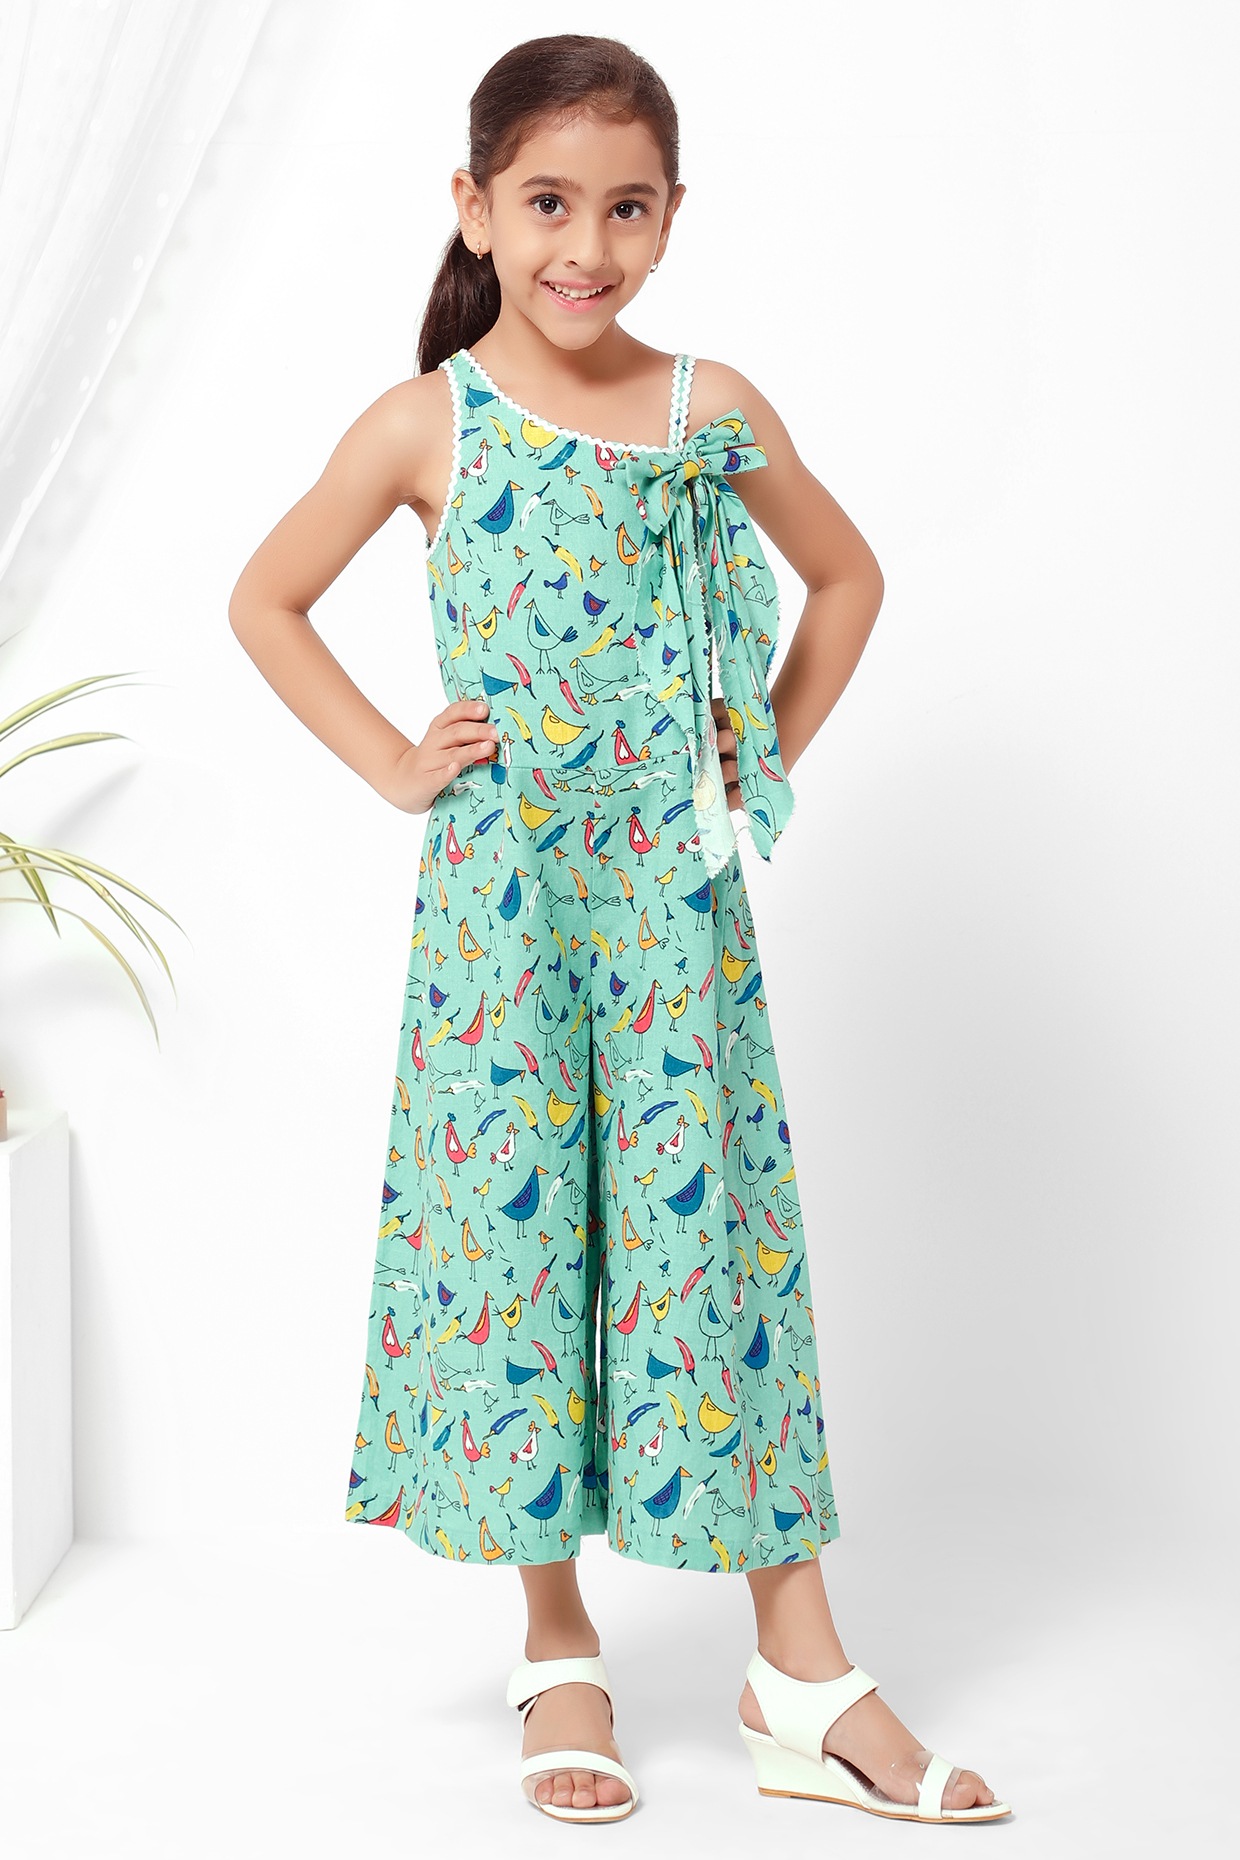 FASHION FLY Floral Print Girls Jumpsuit - Buy FASHION FLY Floral Print Girls  Jumpsuit Online at Best Prices in India | Flipkart.com